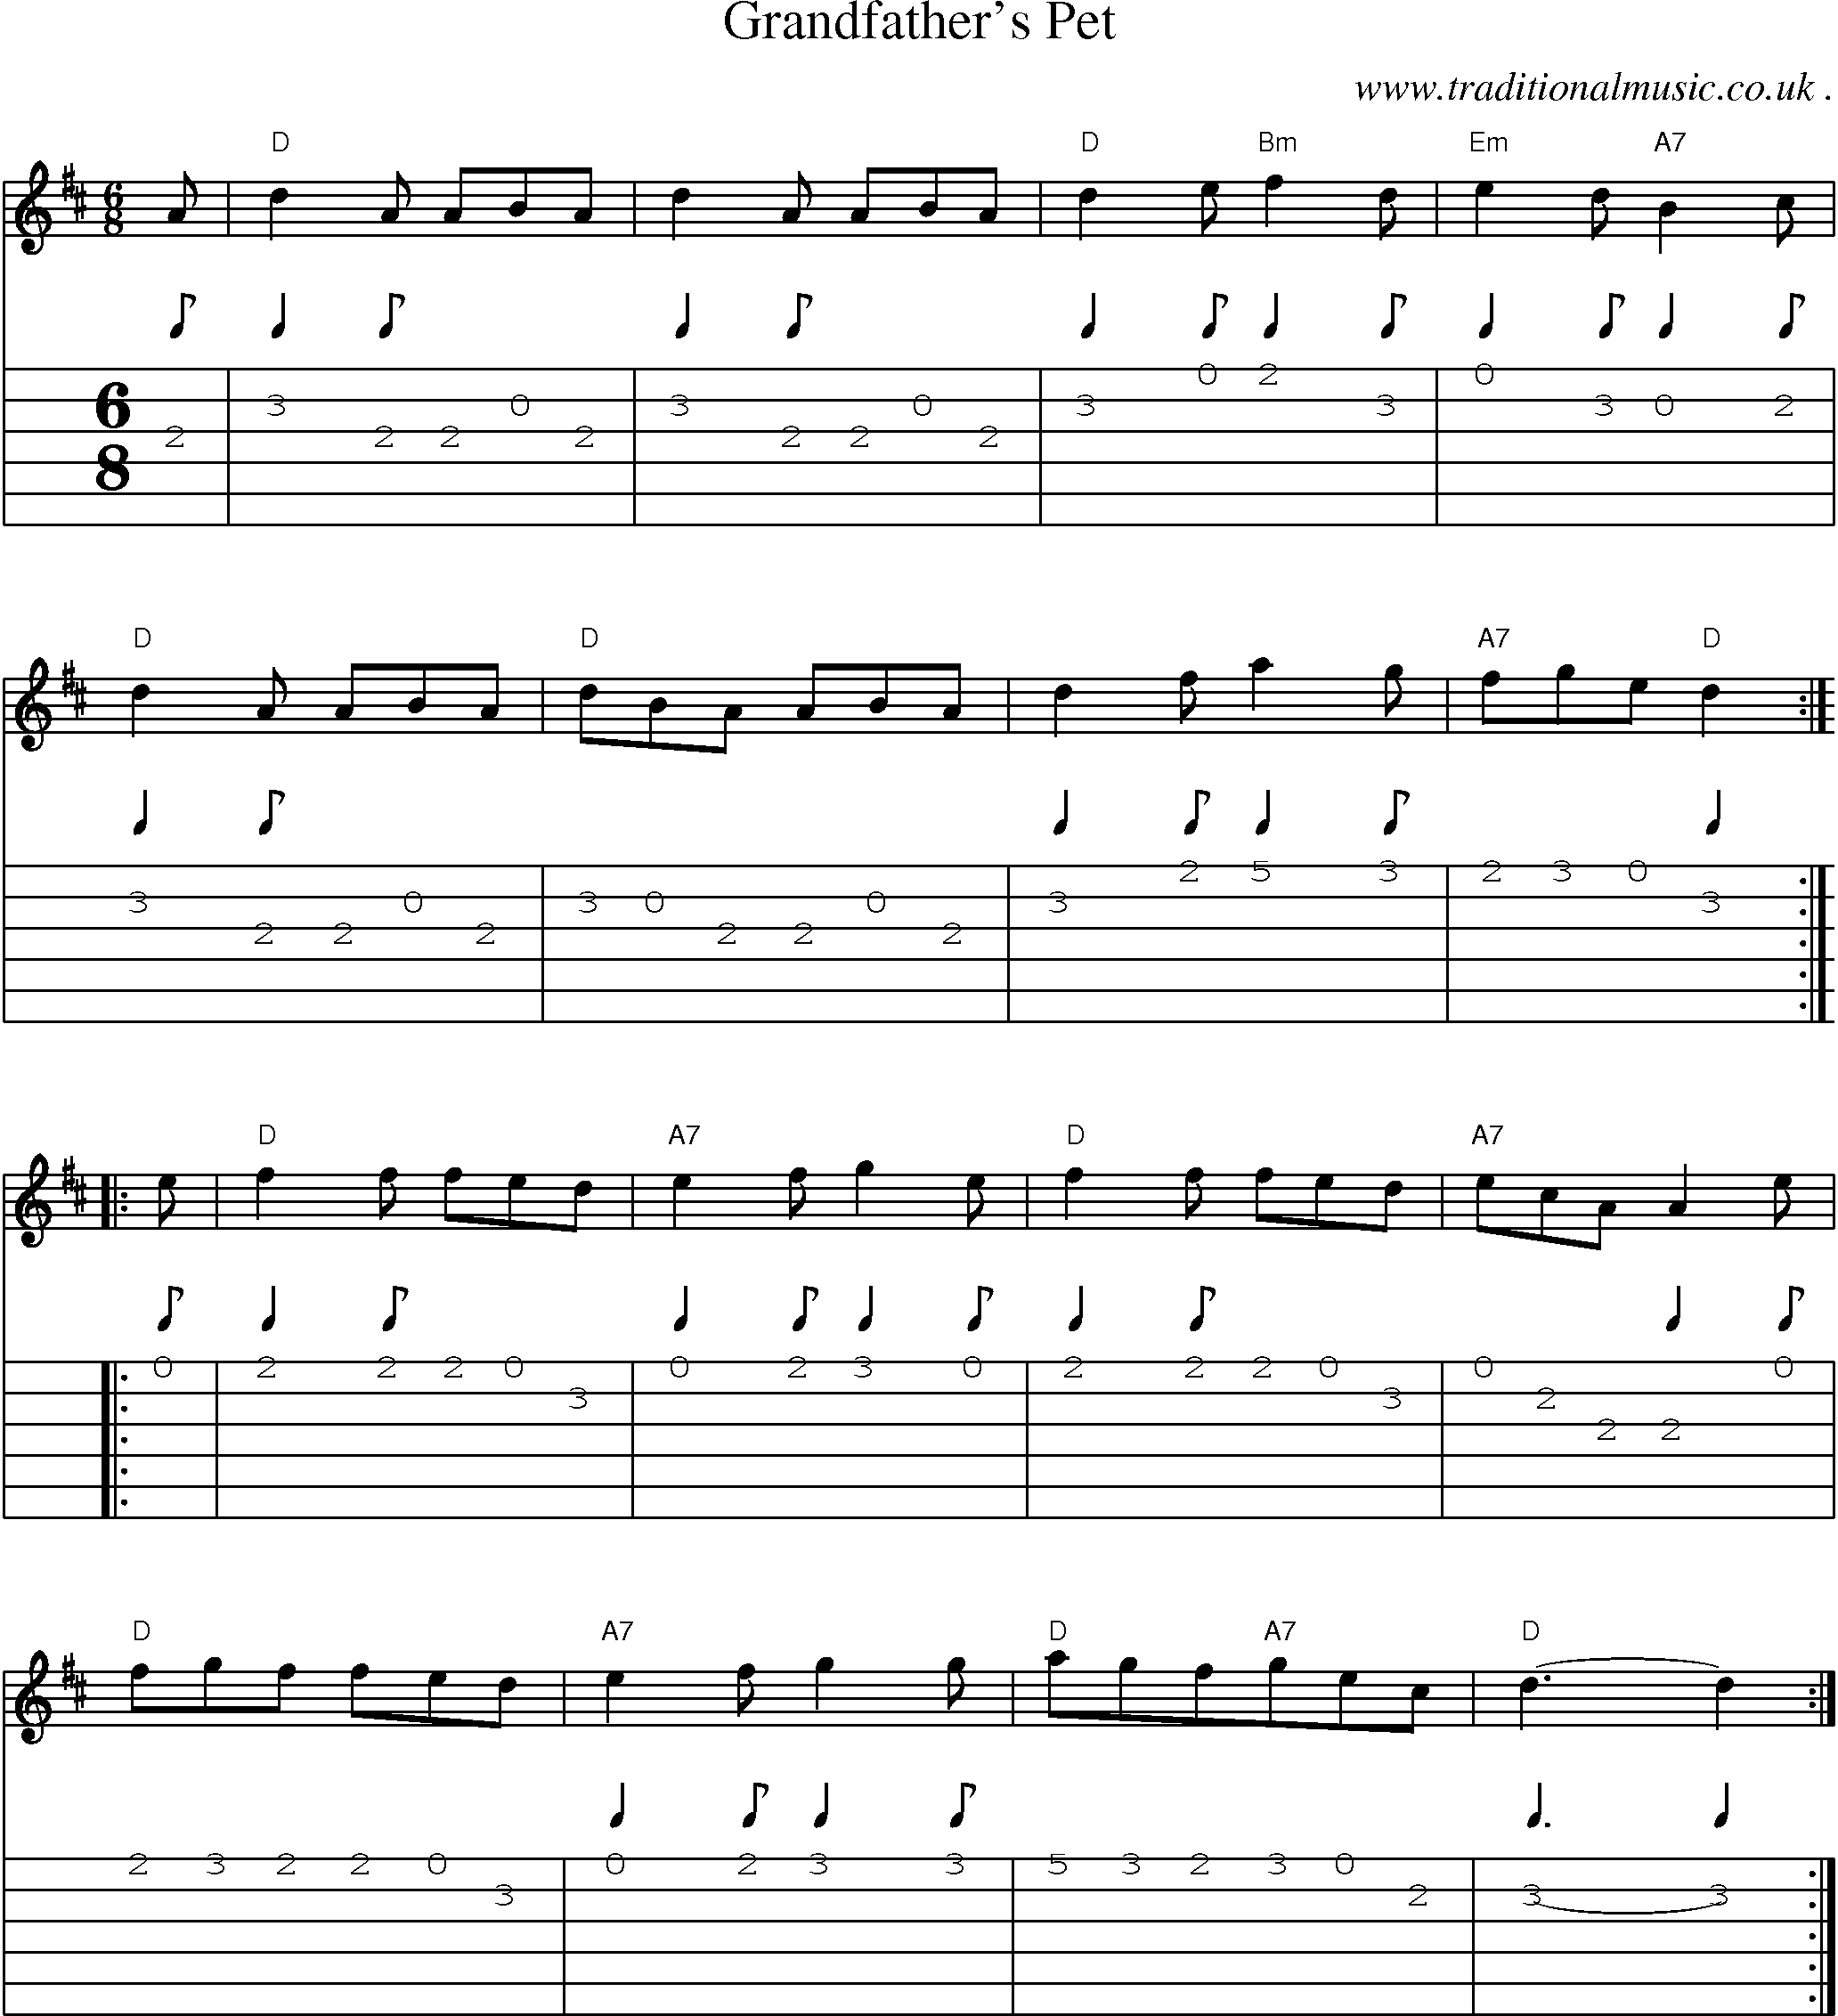 Sheet-Music and Guitar Tabs for Grandfathers Pet